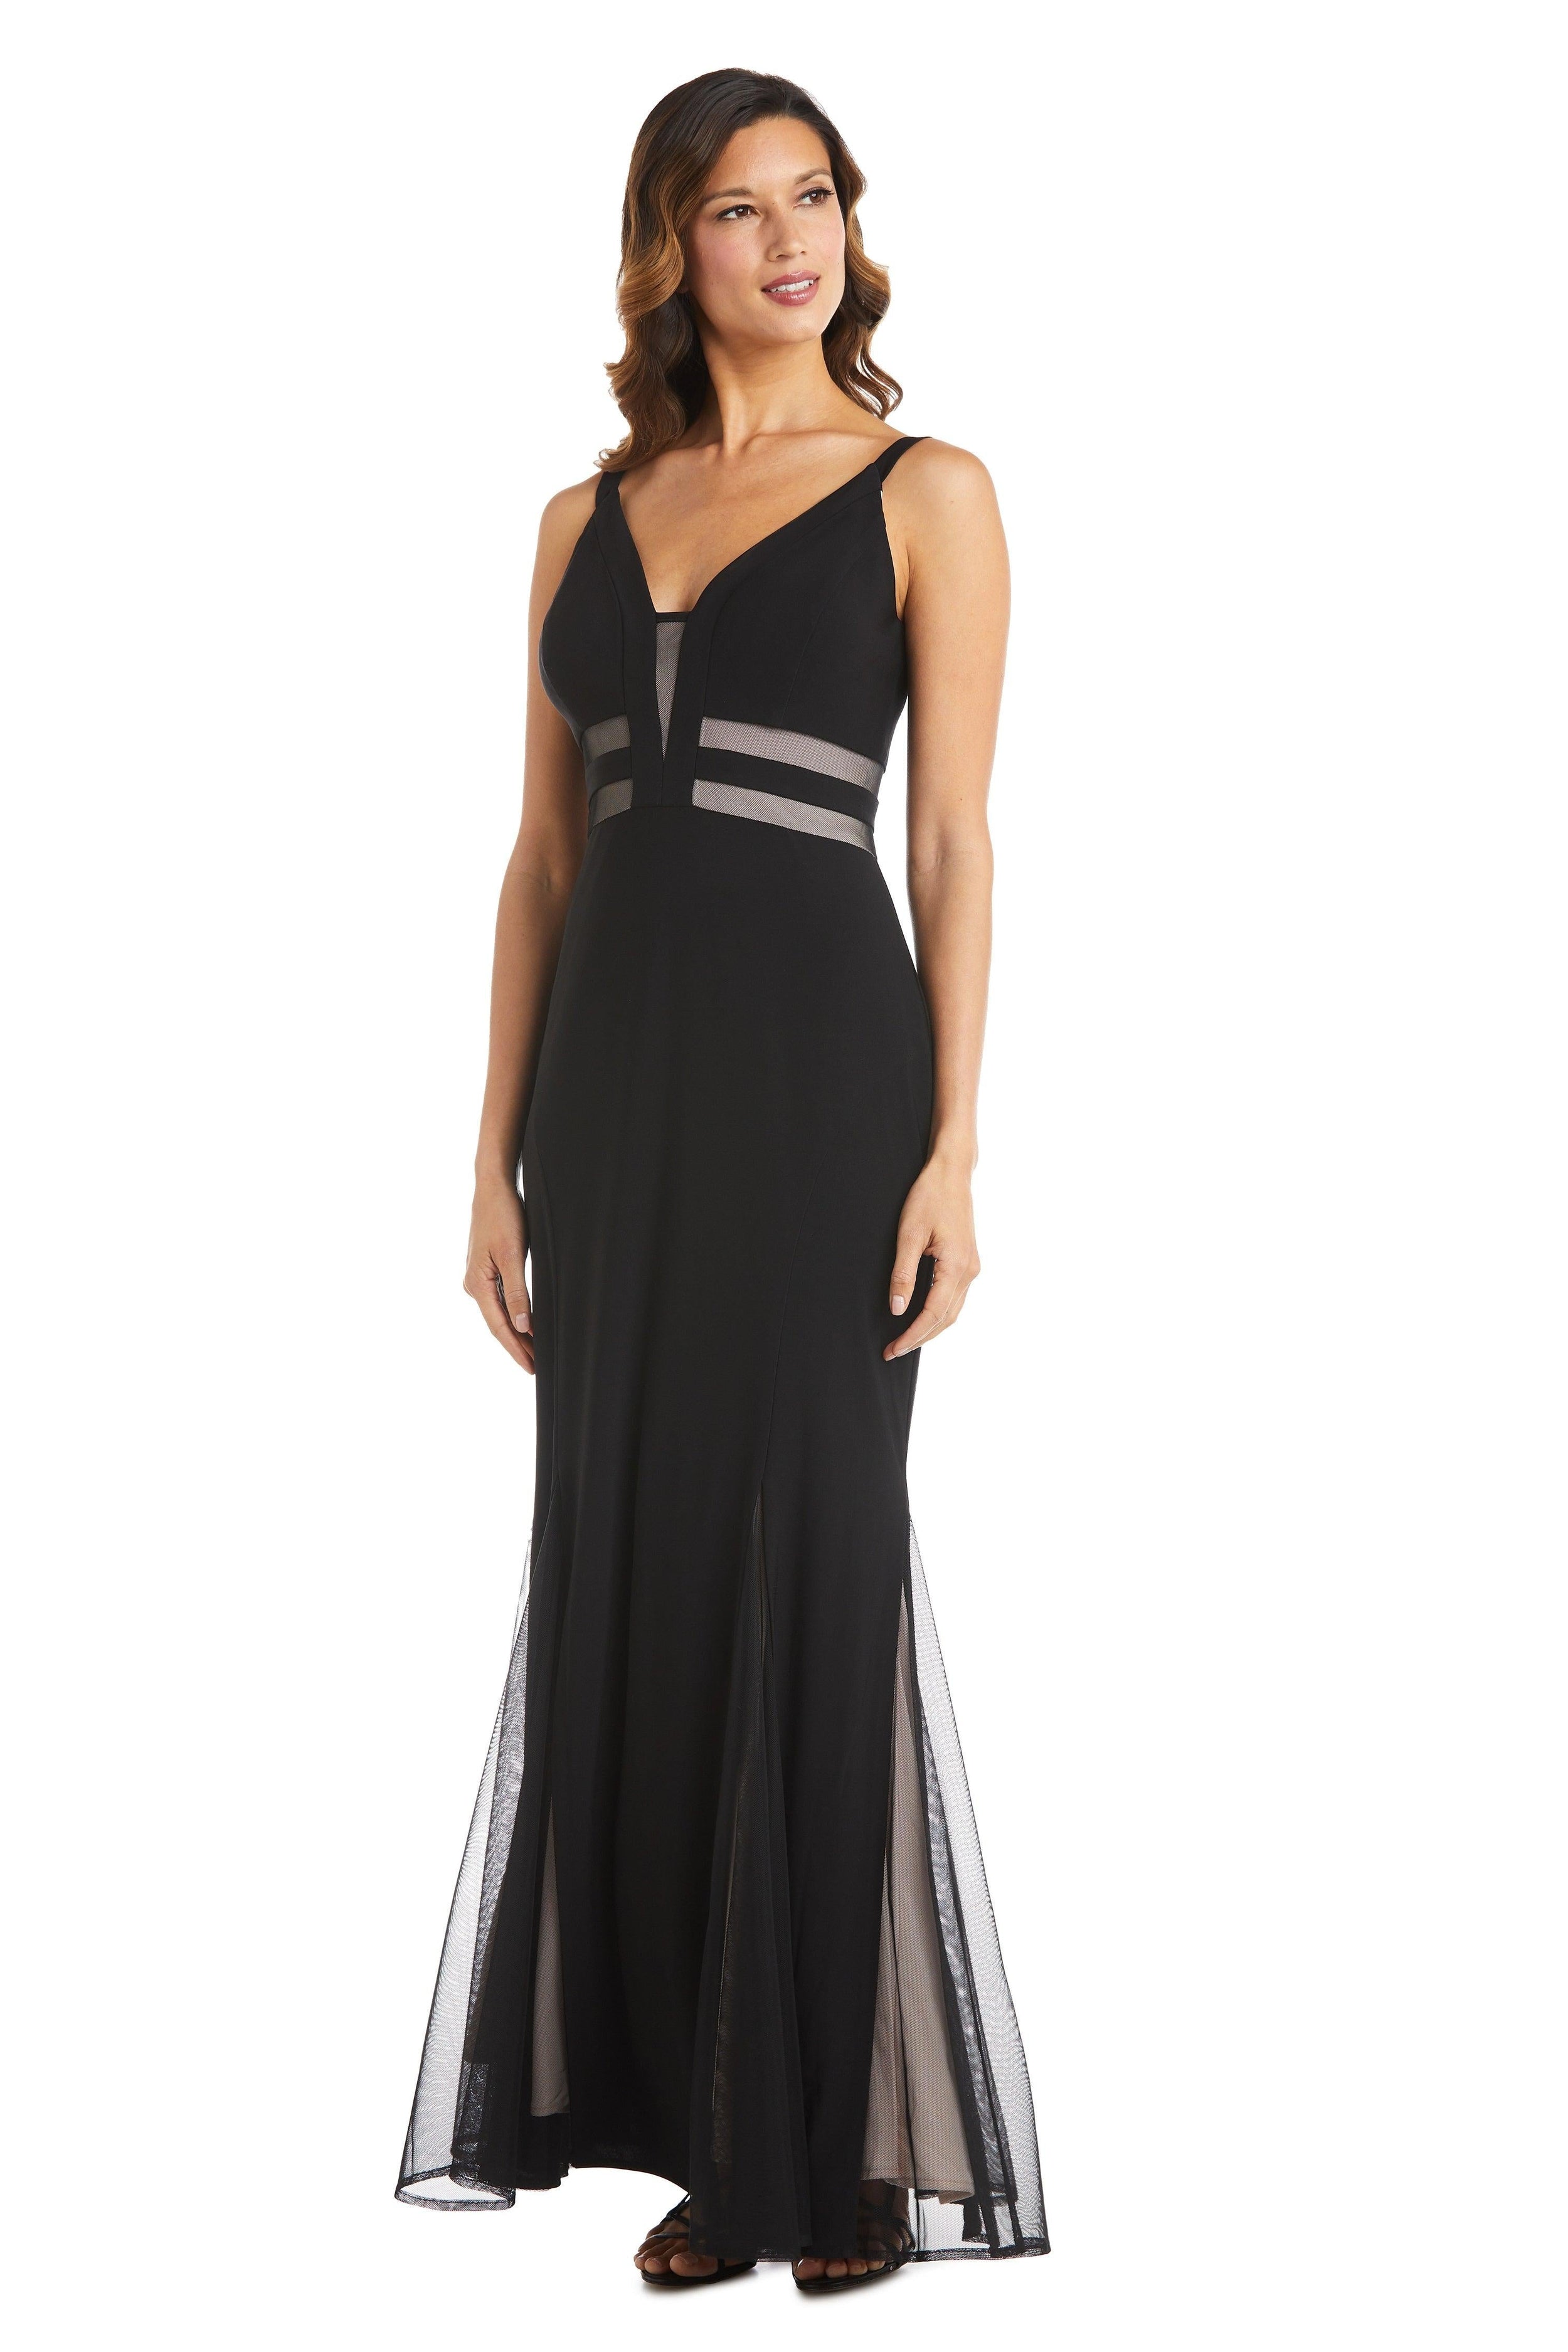 Nightway Long Formal Fitted Evening Dress 22033 - The Dress Outlet